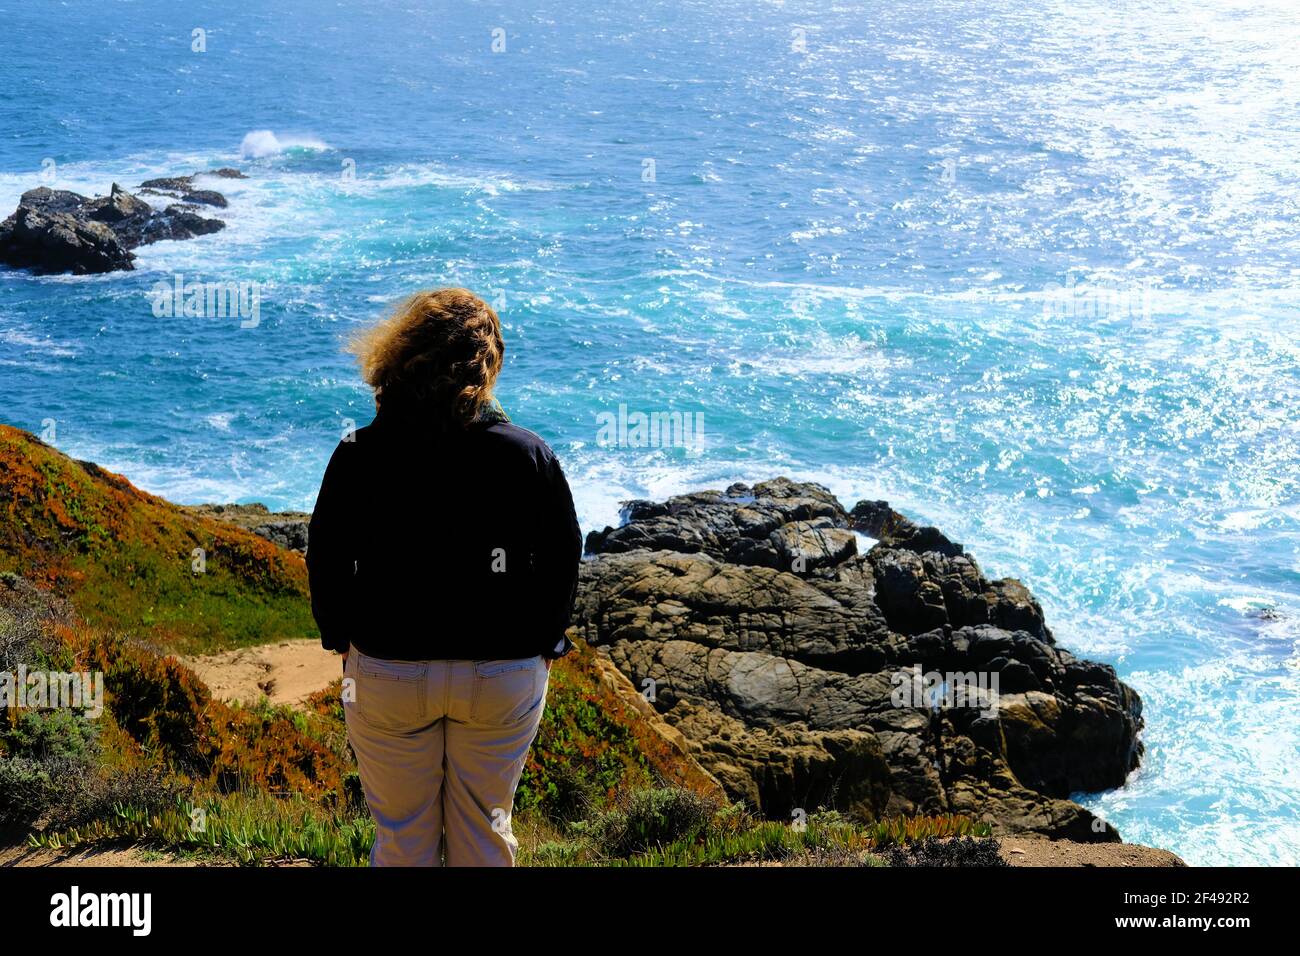 Middle-aged woman facing the ocean from above, overlooking rocks on the coast in Northern California; solitude, pensive outlook, facing the future. Stock Photo